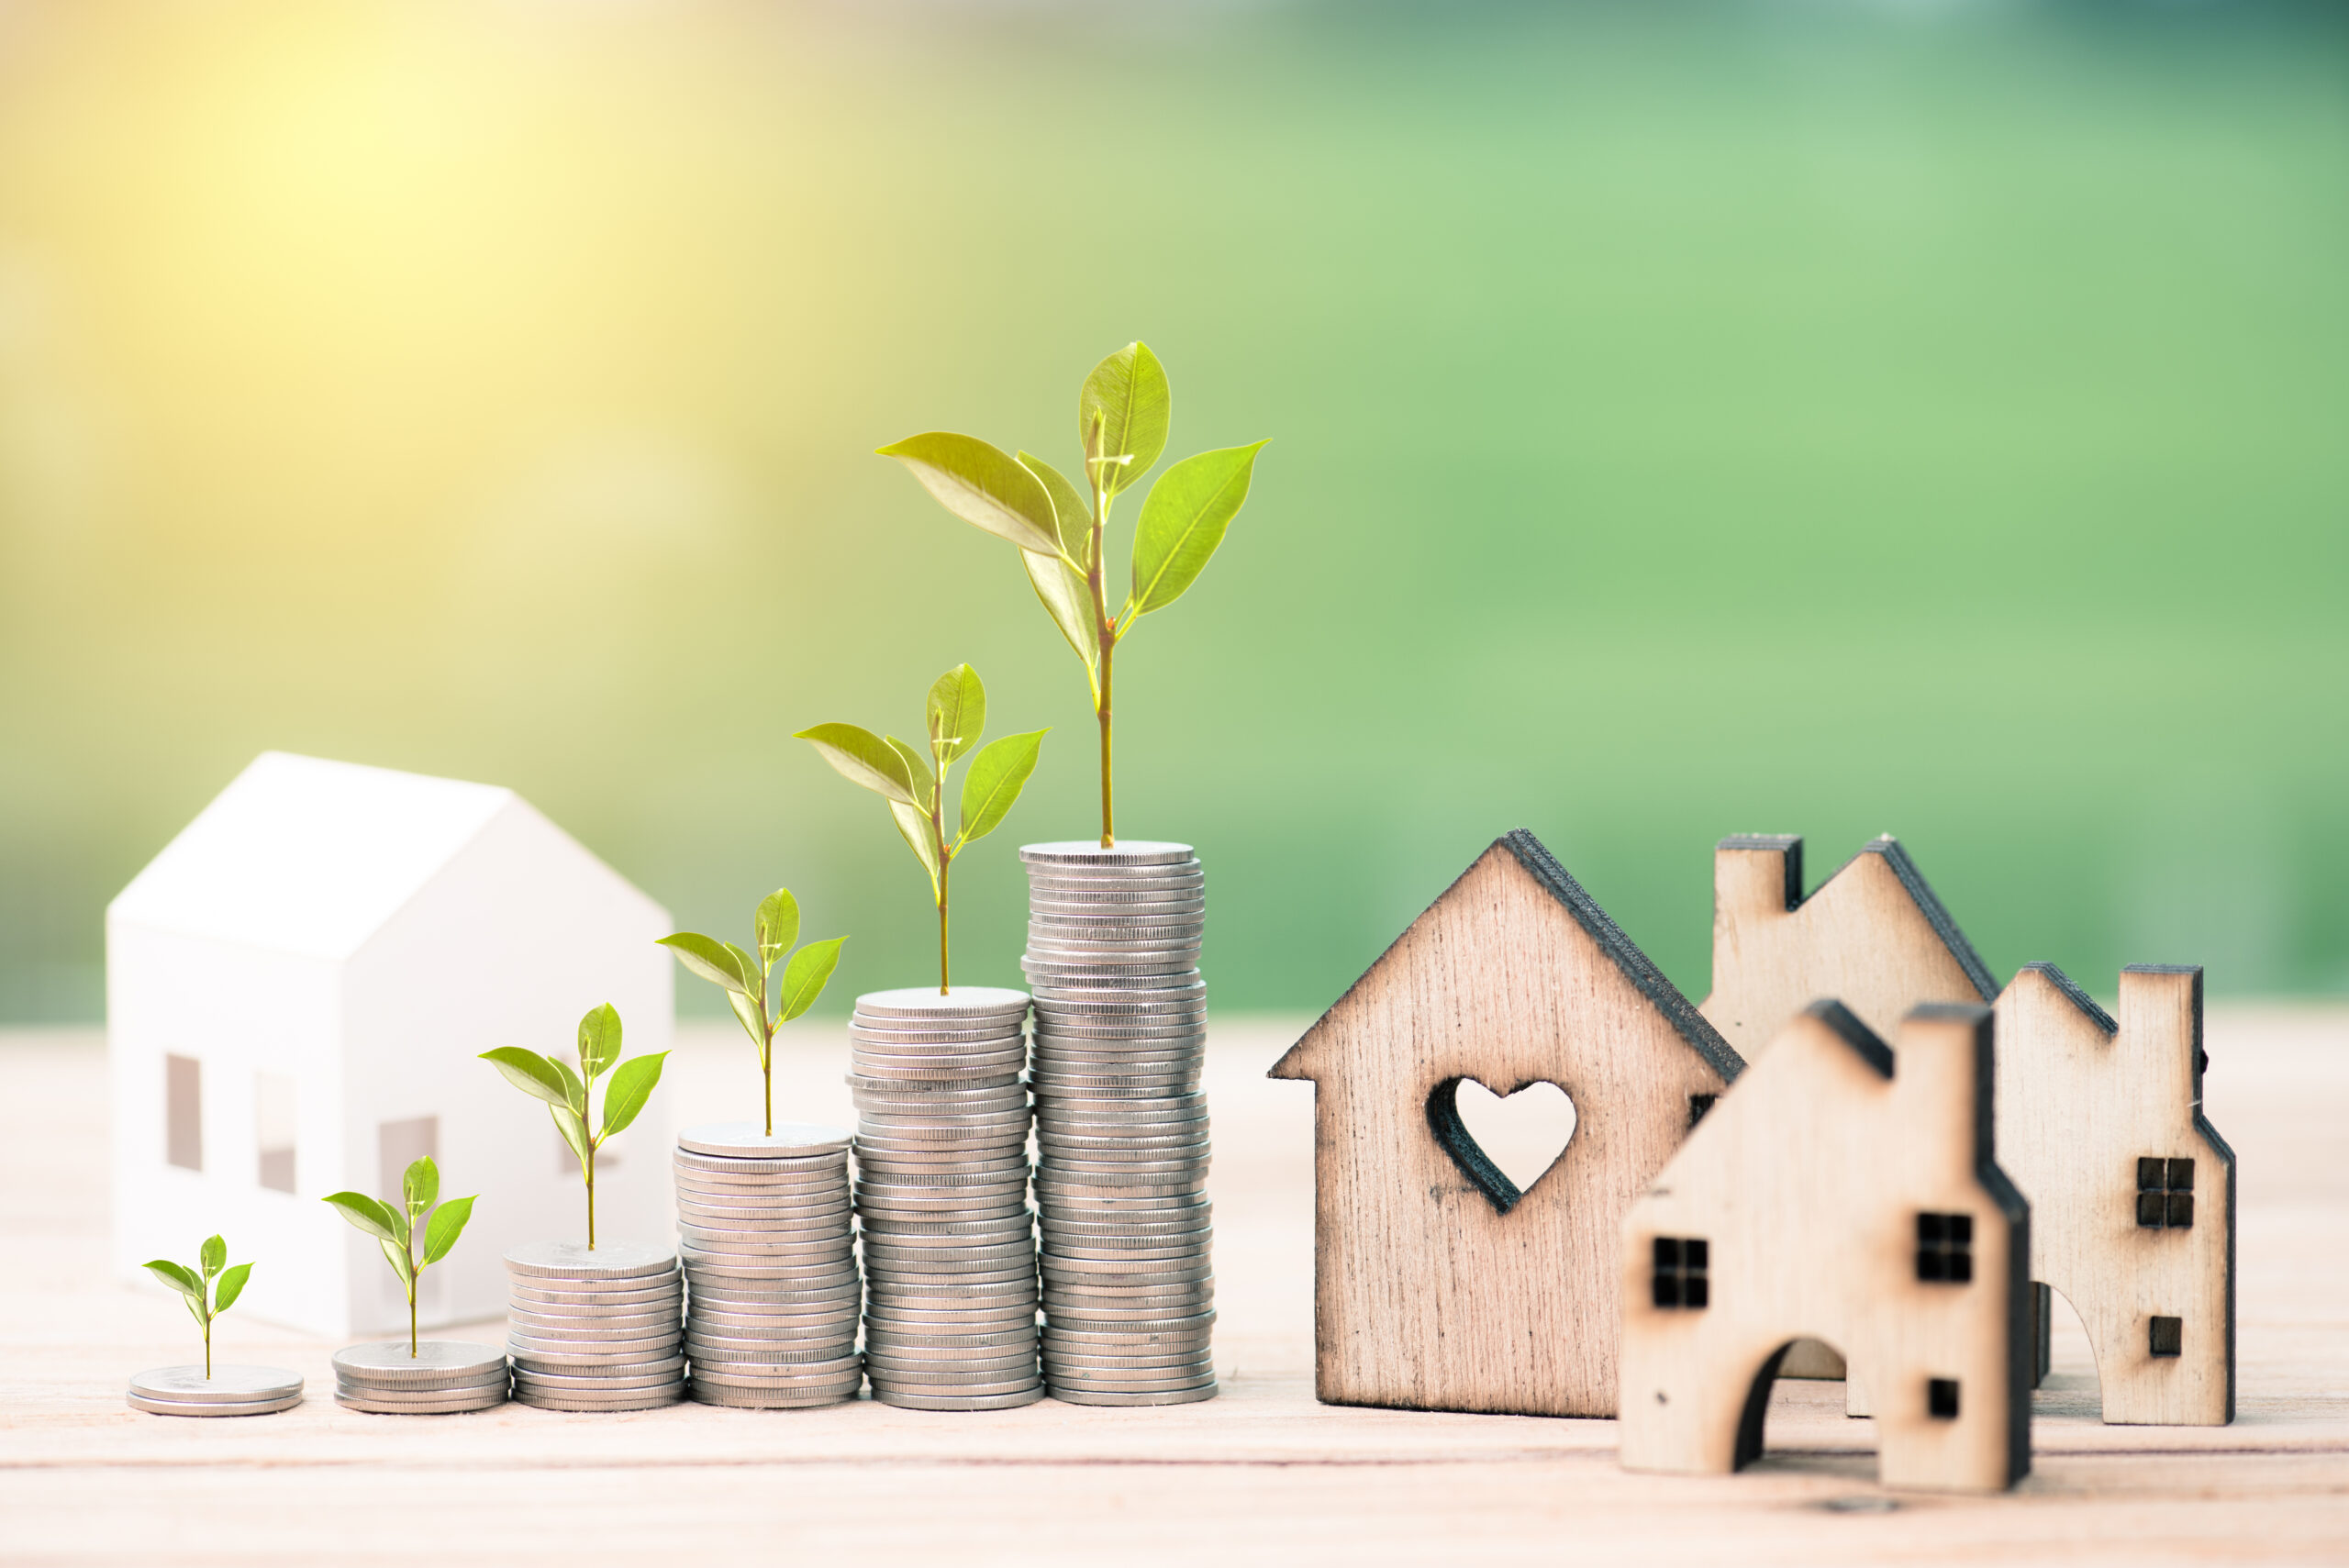 Benefits Of Generating Passive Income Through Real Estate